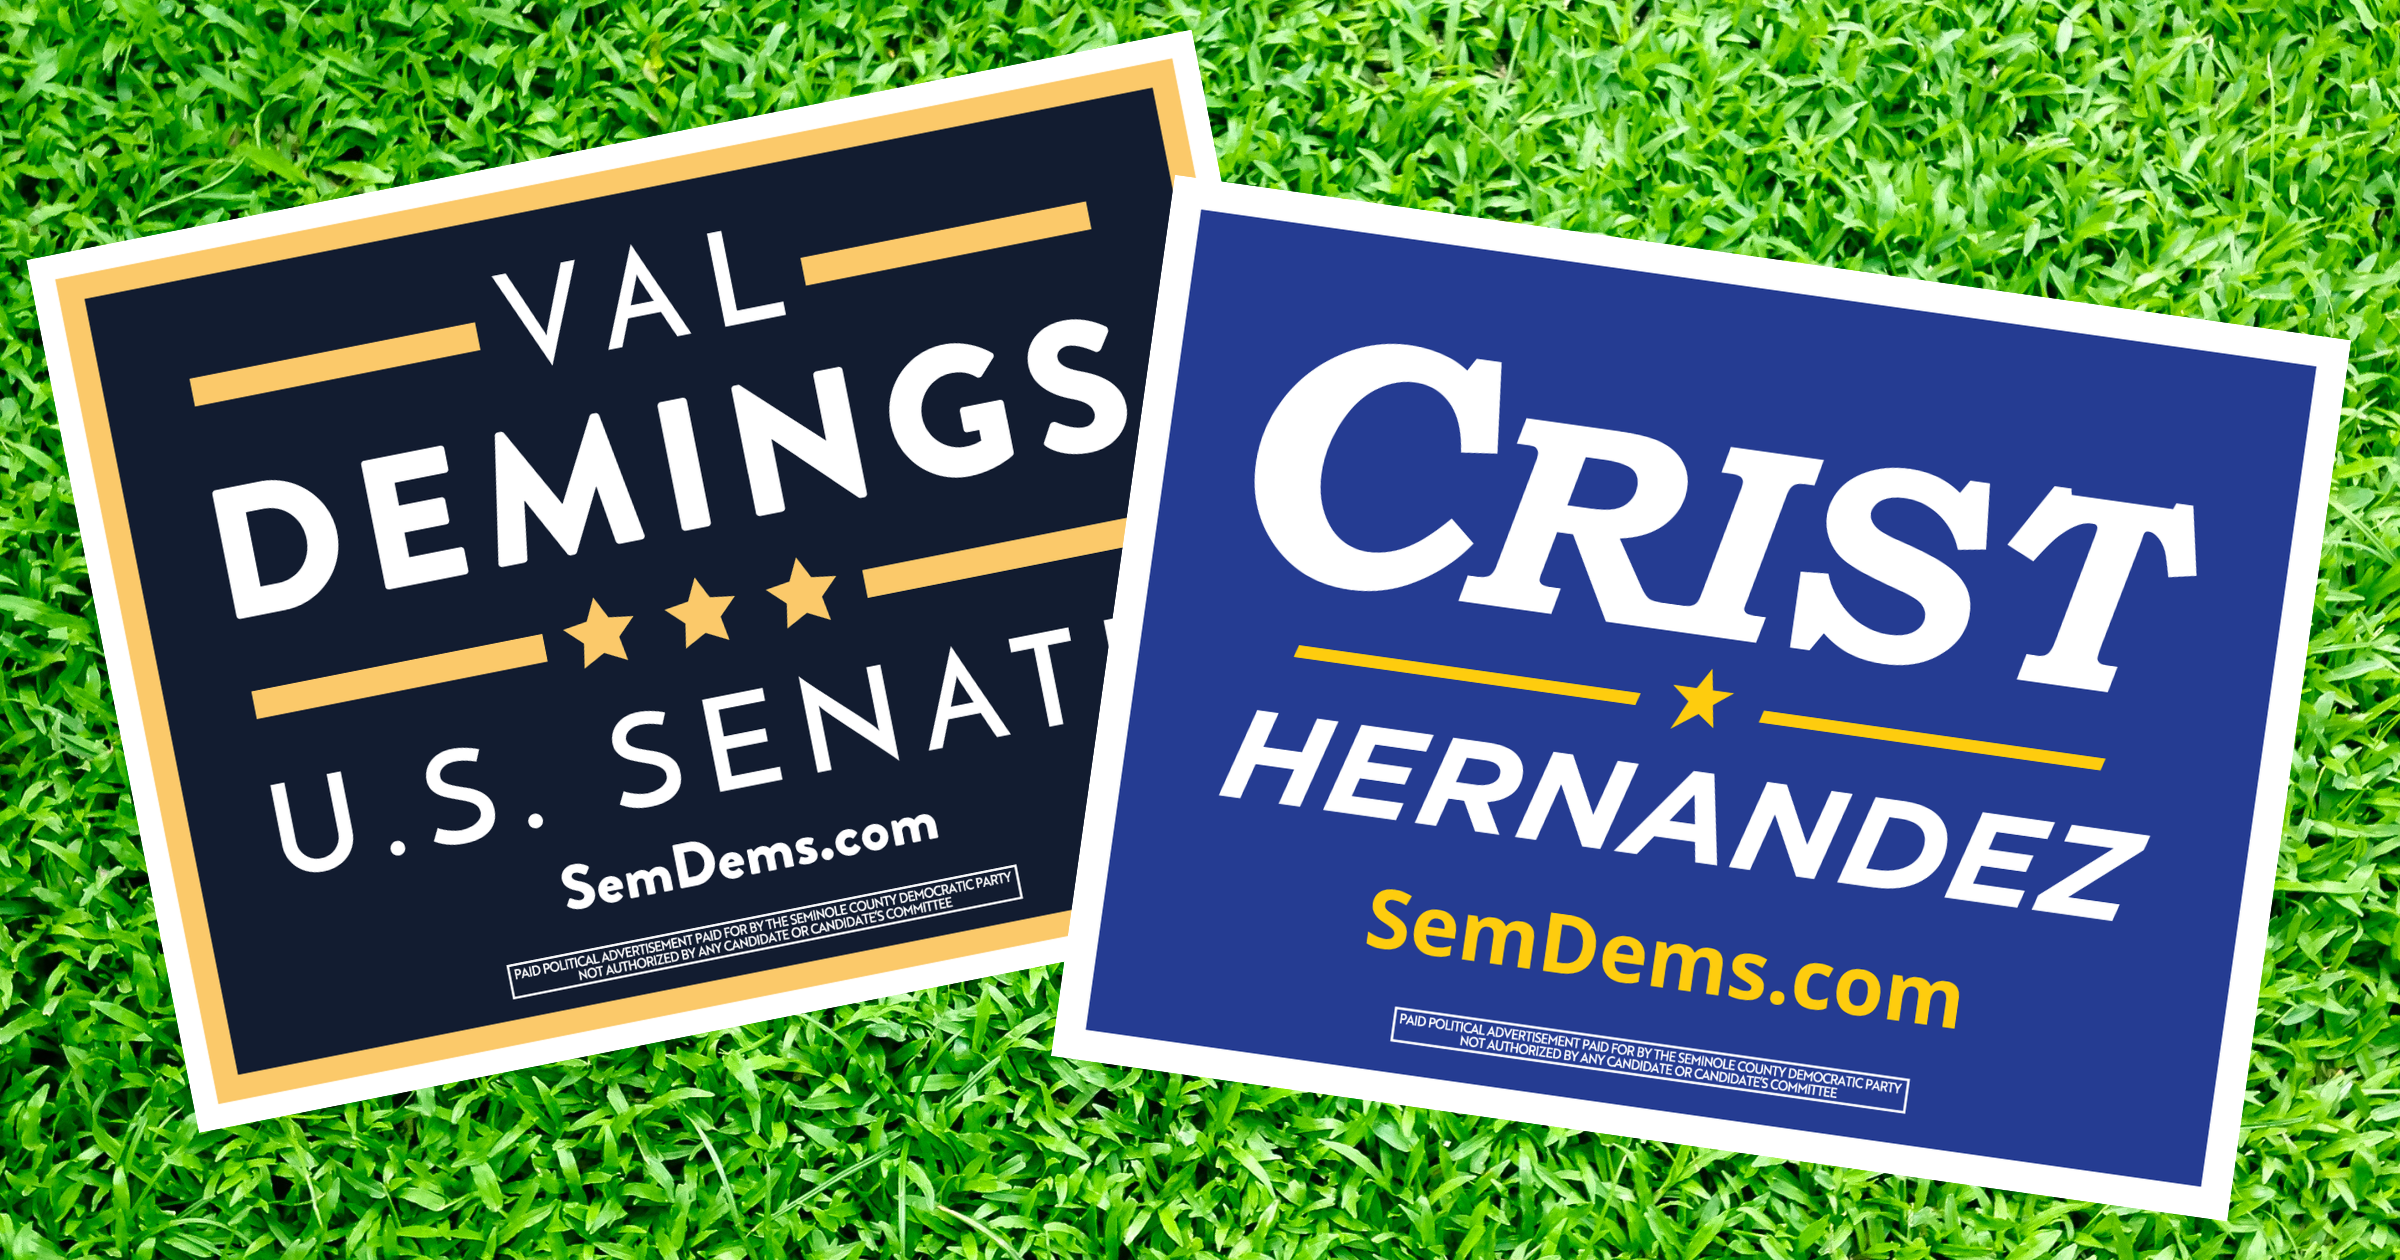 Crist and Demings Yard Signs